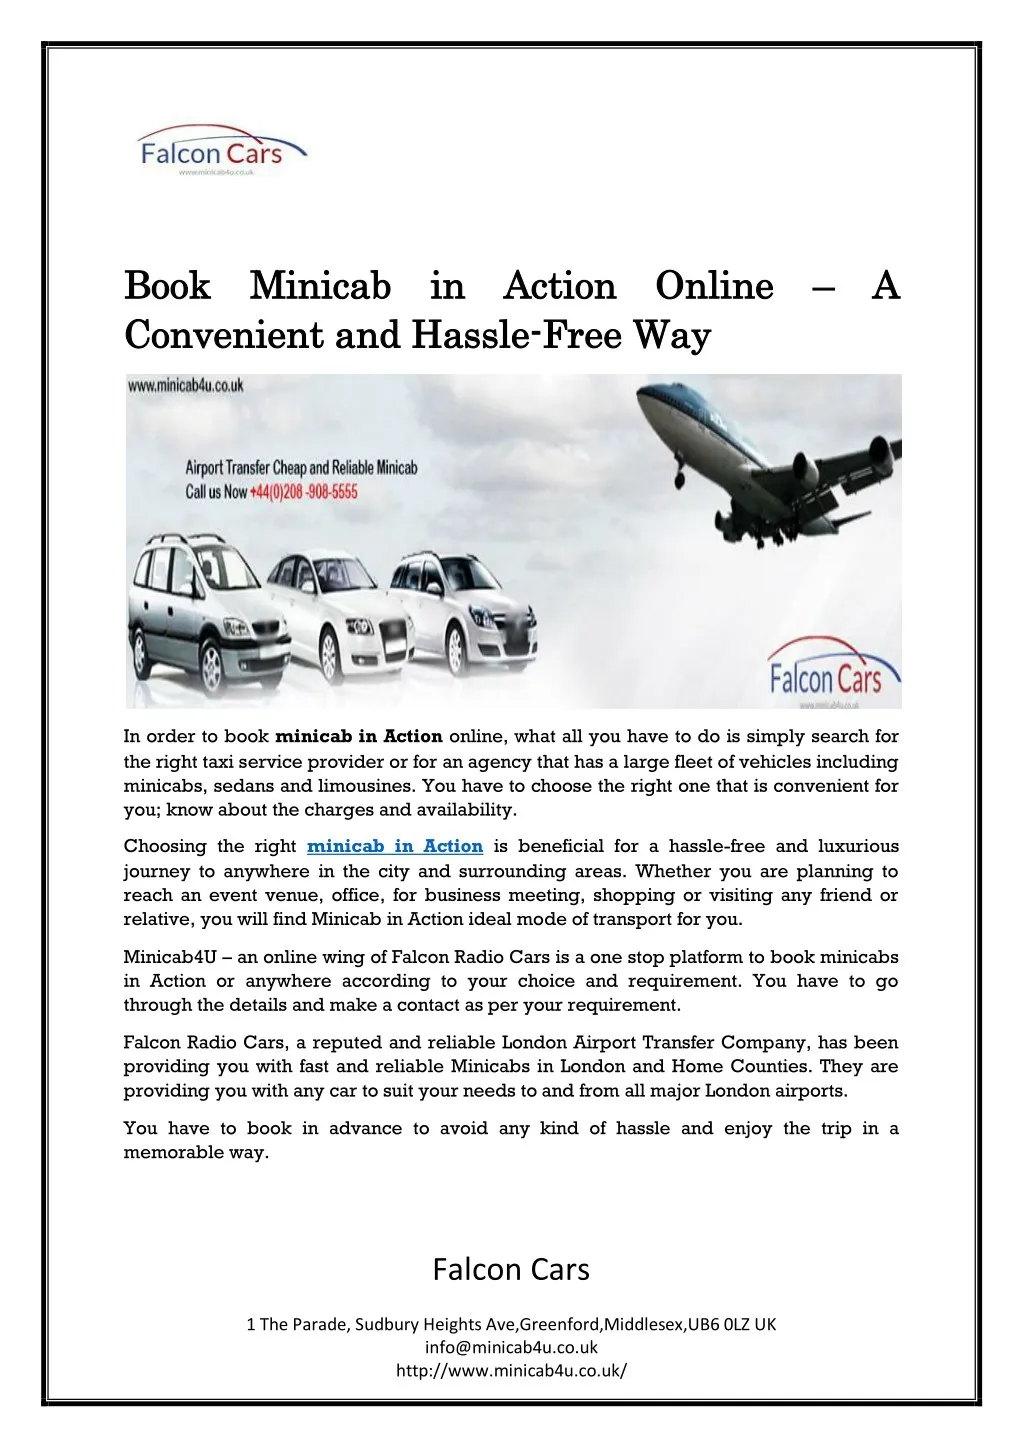 book minicab in action online book minicab